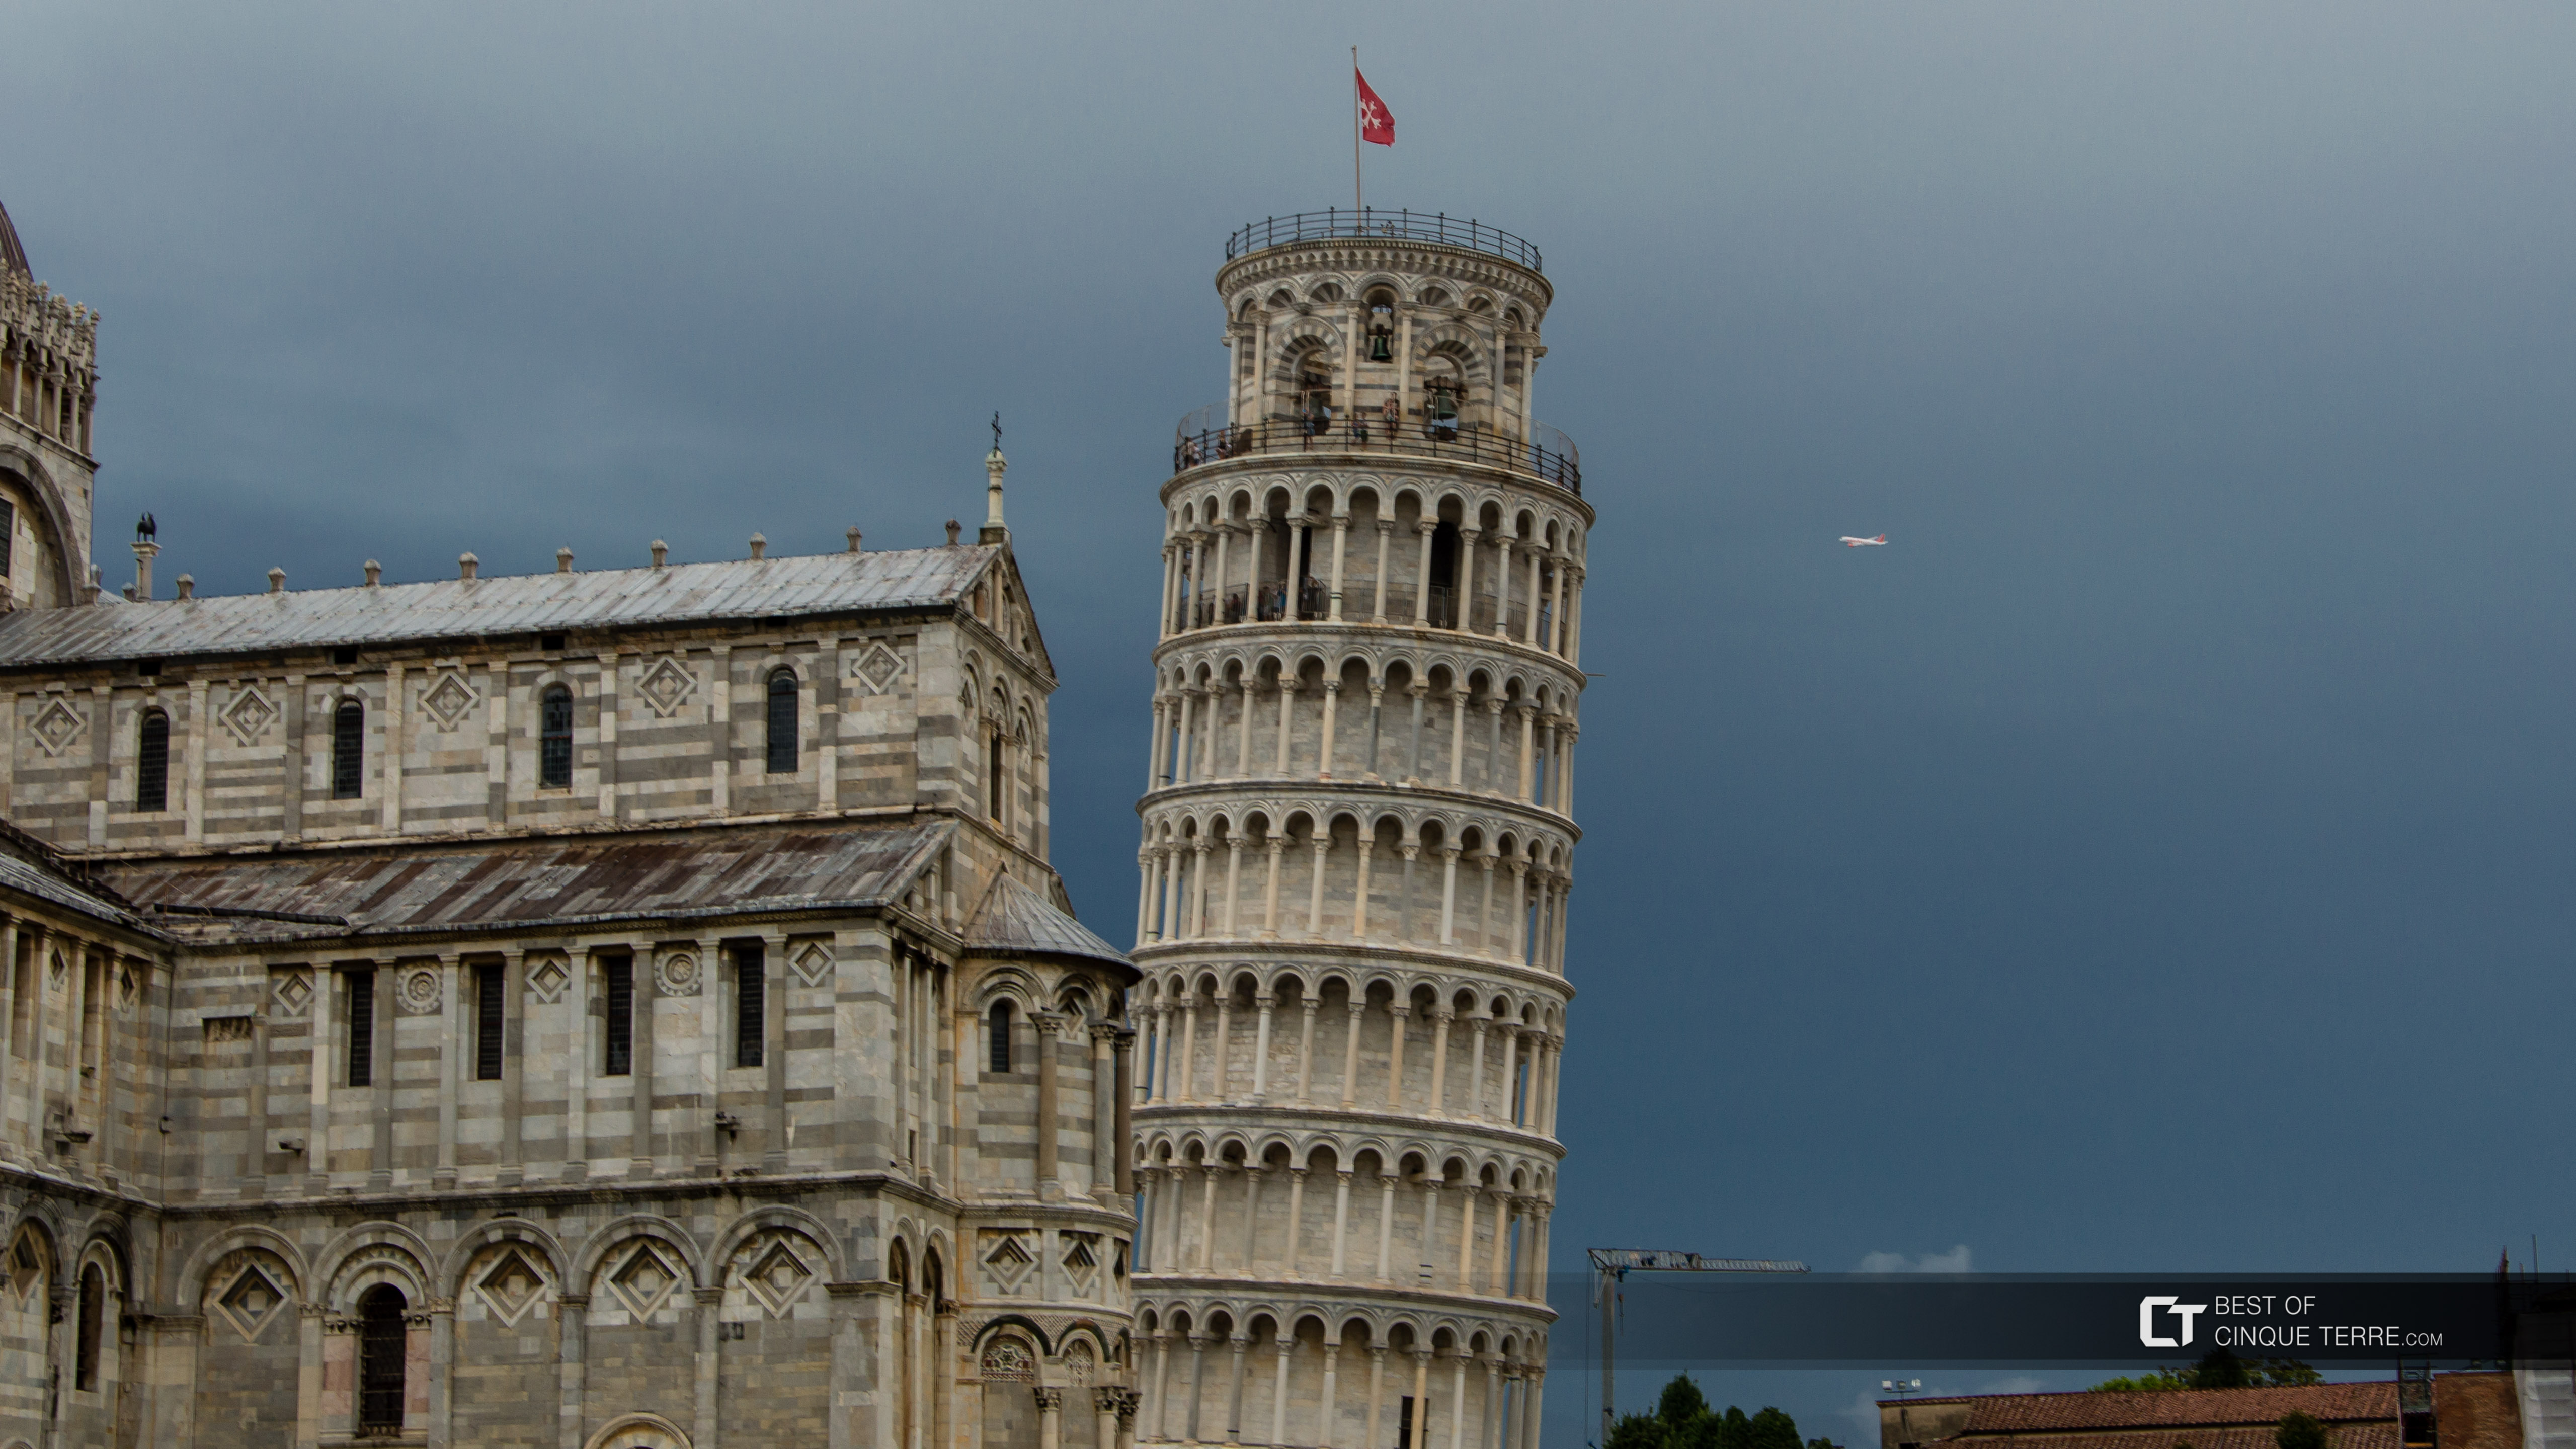 Cathedral and Leaning Tower, Pisa, Italy